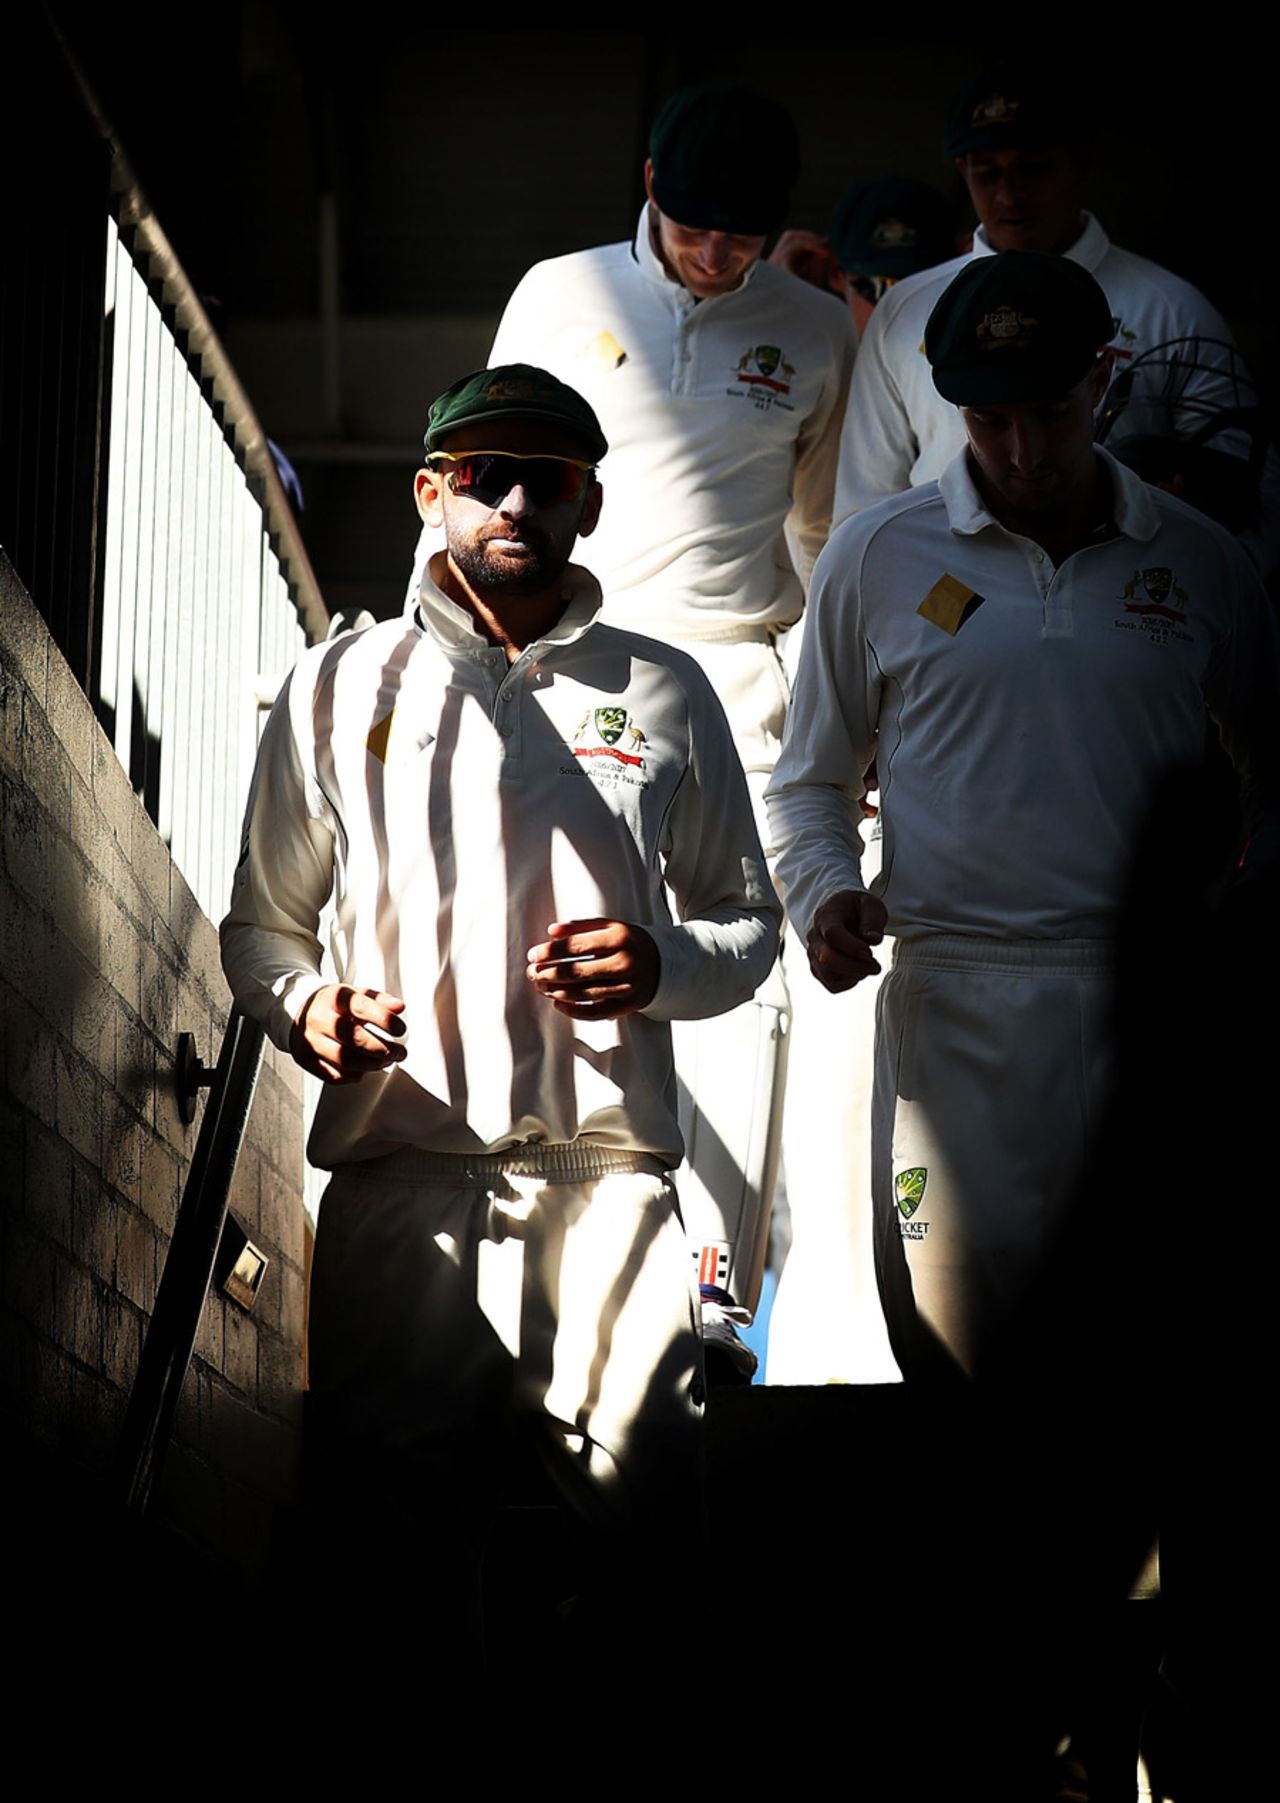 Nathan Lyon walks out to the middle with his team mates, Australia v South Africa, 1st Test, Perth, 1st day, November 3, 2016